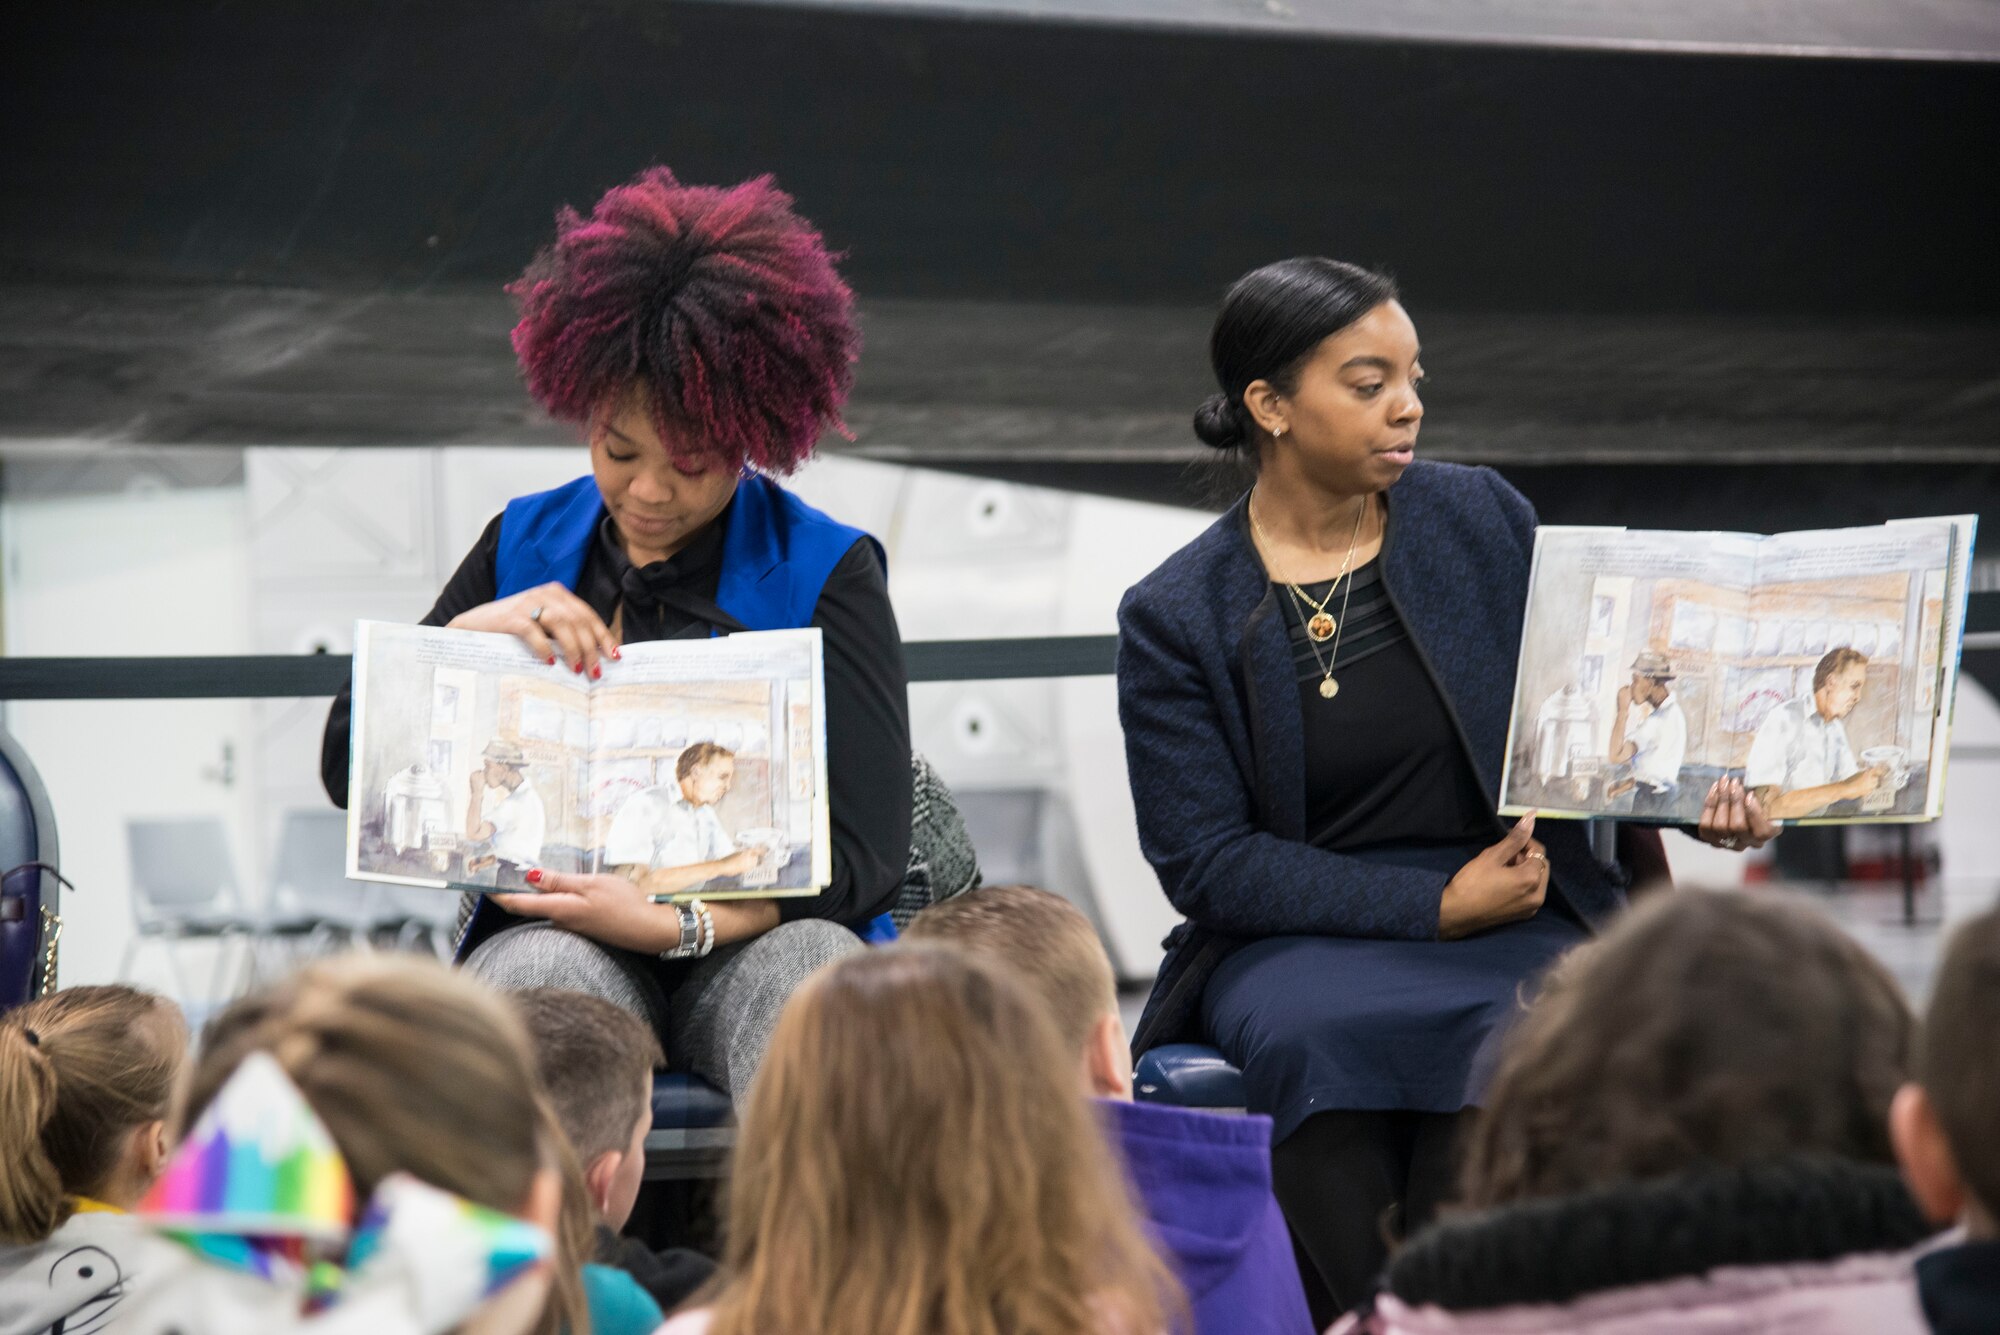 More than 850 local second and third grade students participated in the museum’s 20th annual Read Across America "Read-In" from Feb 28-March 1, 2019. Volunteers from Wright-Patterson AFB read books to the students as part of the national celebration honoring Dr. Seuss’ 115th birthday. (U.S. Air Force photo)